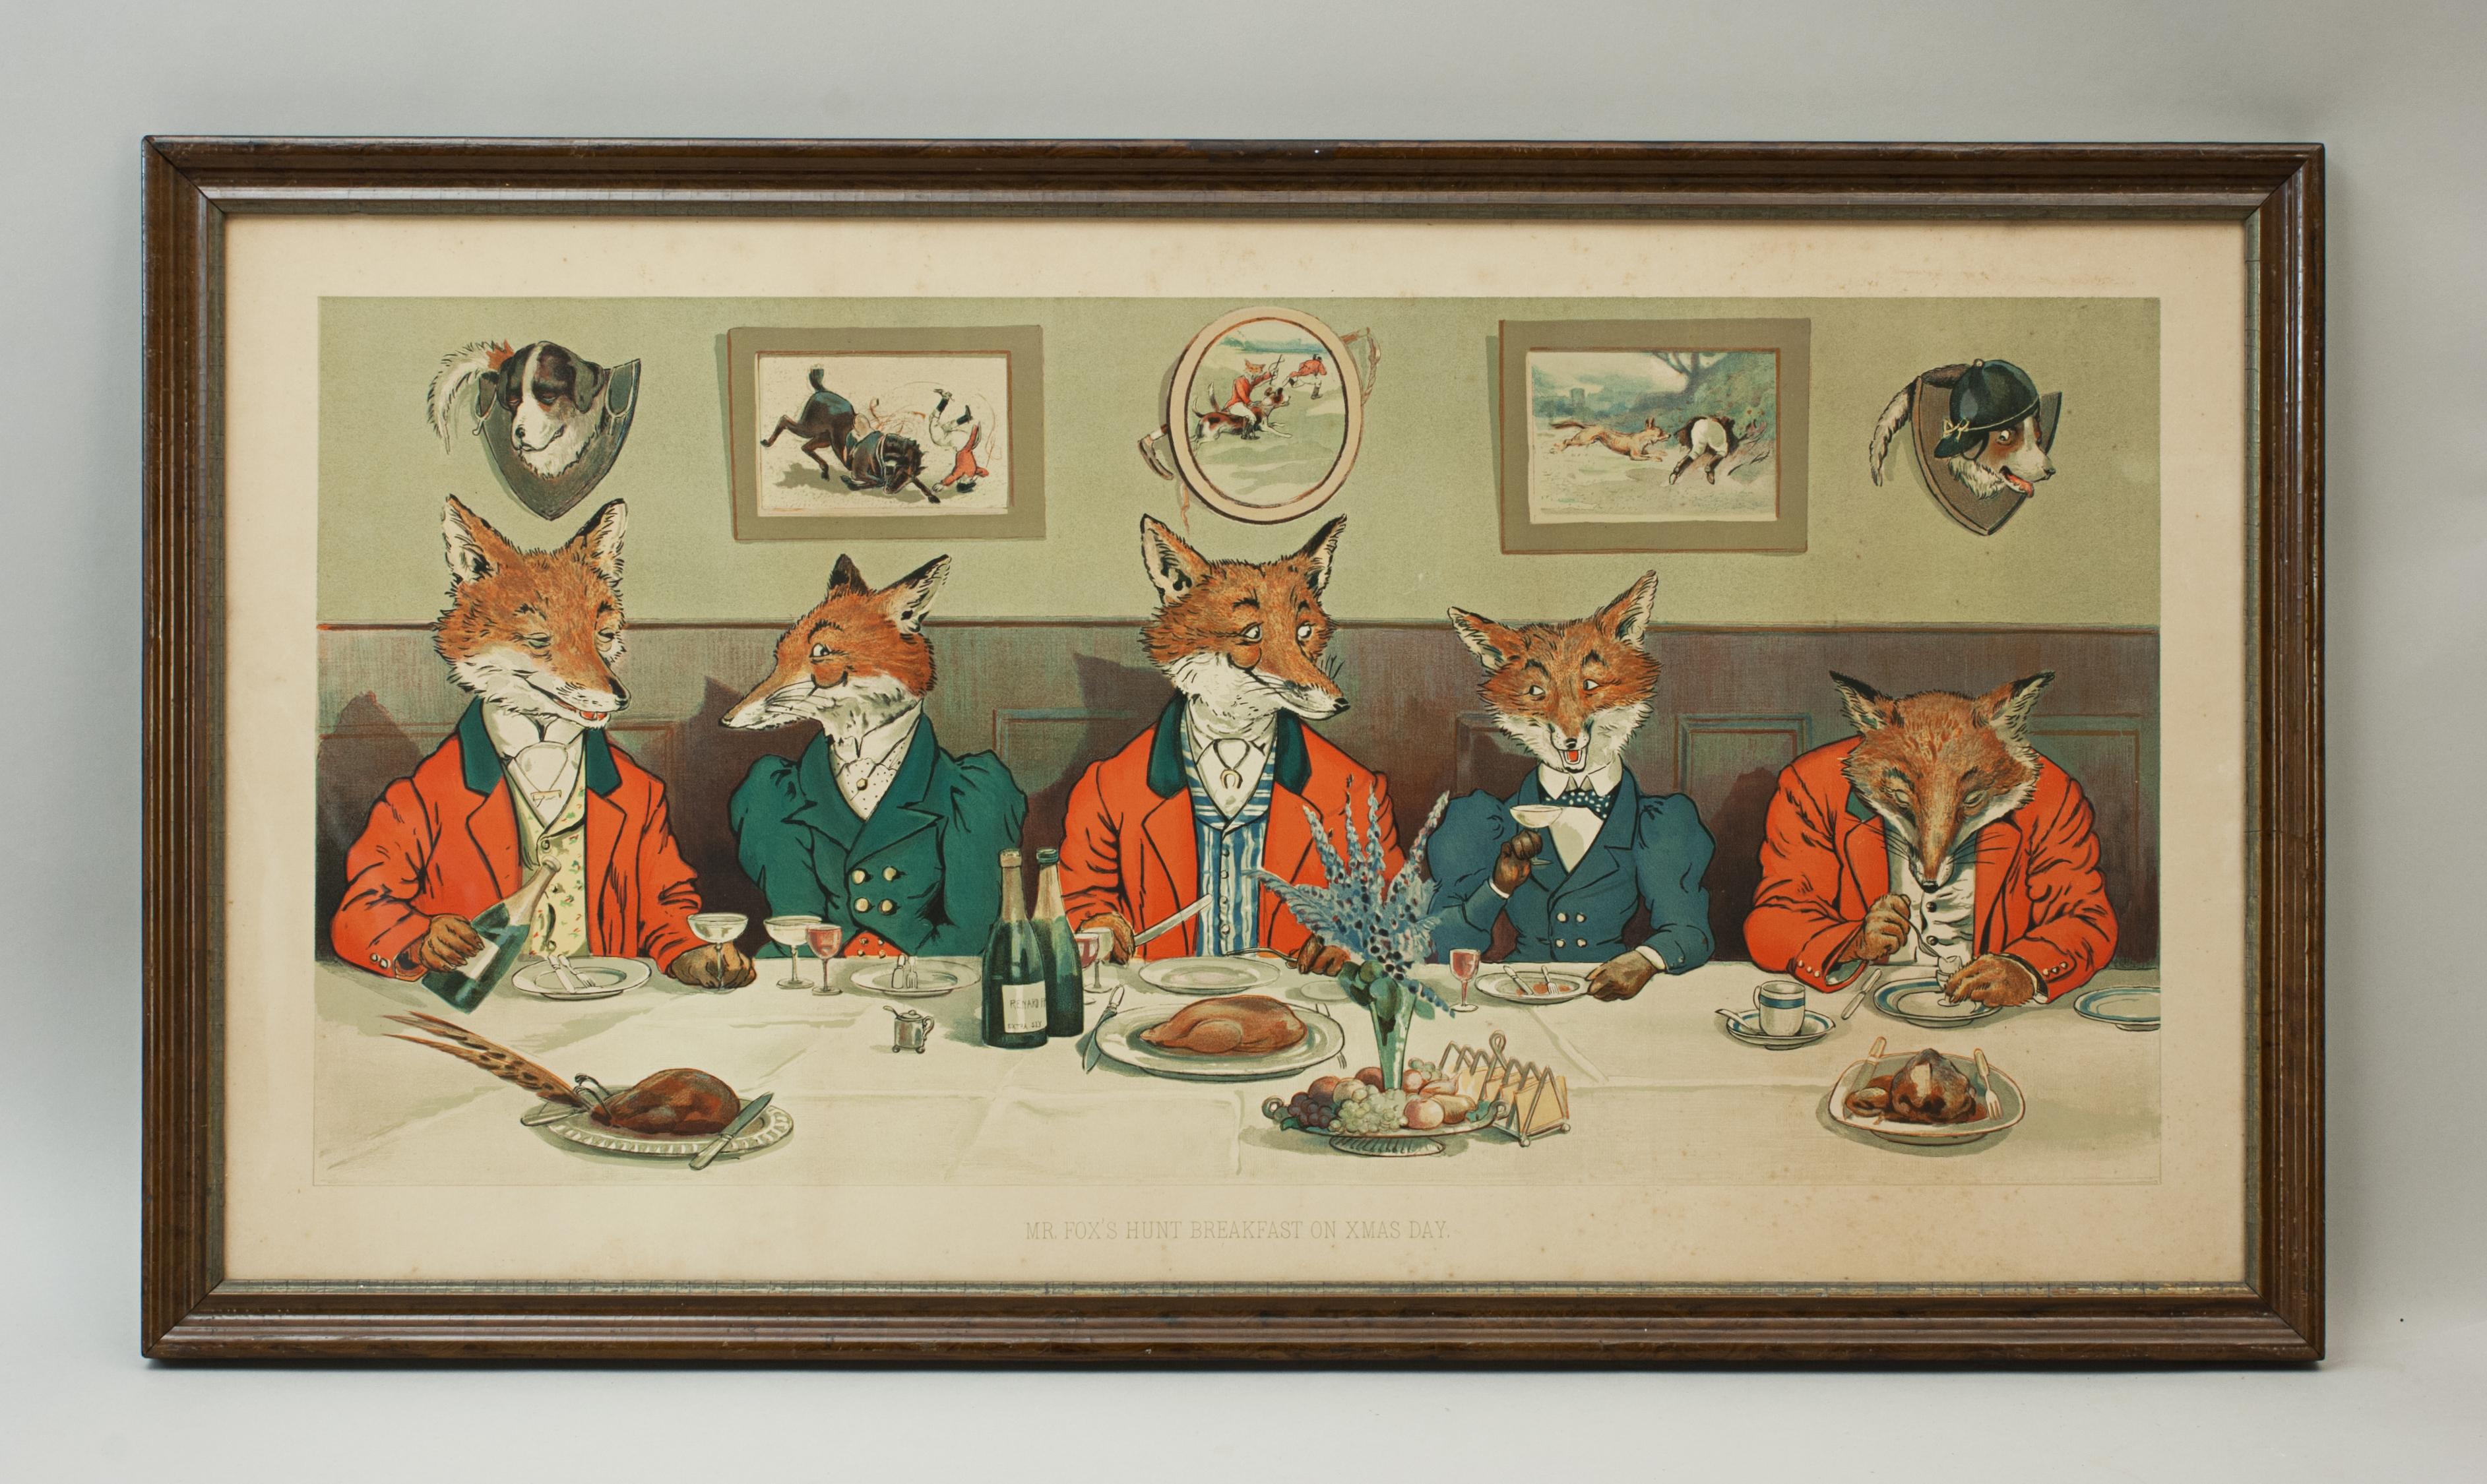 Vintage fox hunting print.
A very colorful original chromolithograph after Harry Neilson, 'Mr. Fox's Hunt Breakfast on Xmas Day'. A humorous hunting picture in very good original condition, with title, and original frame. Printed for The Penny